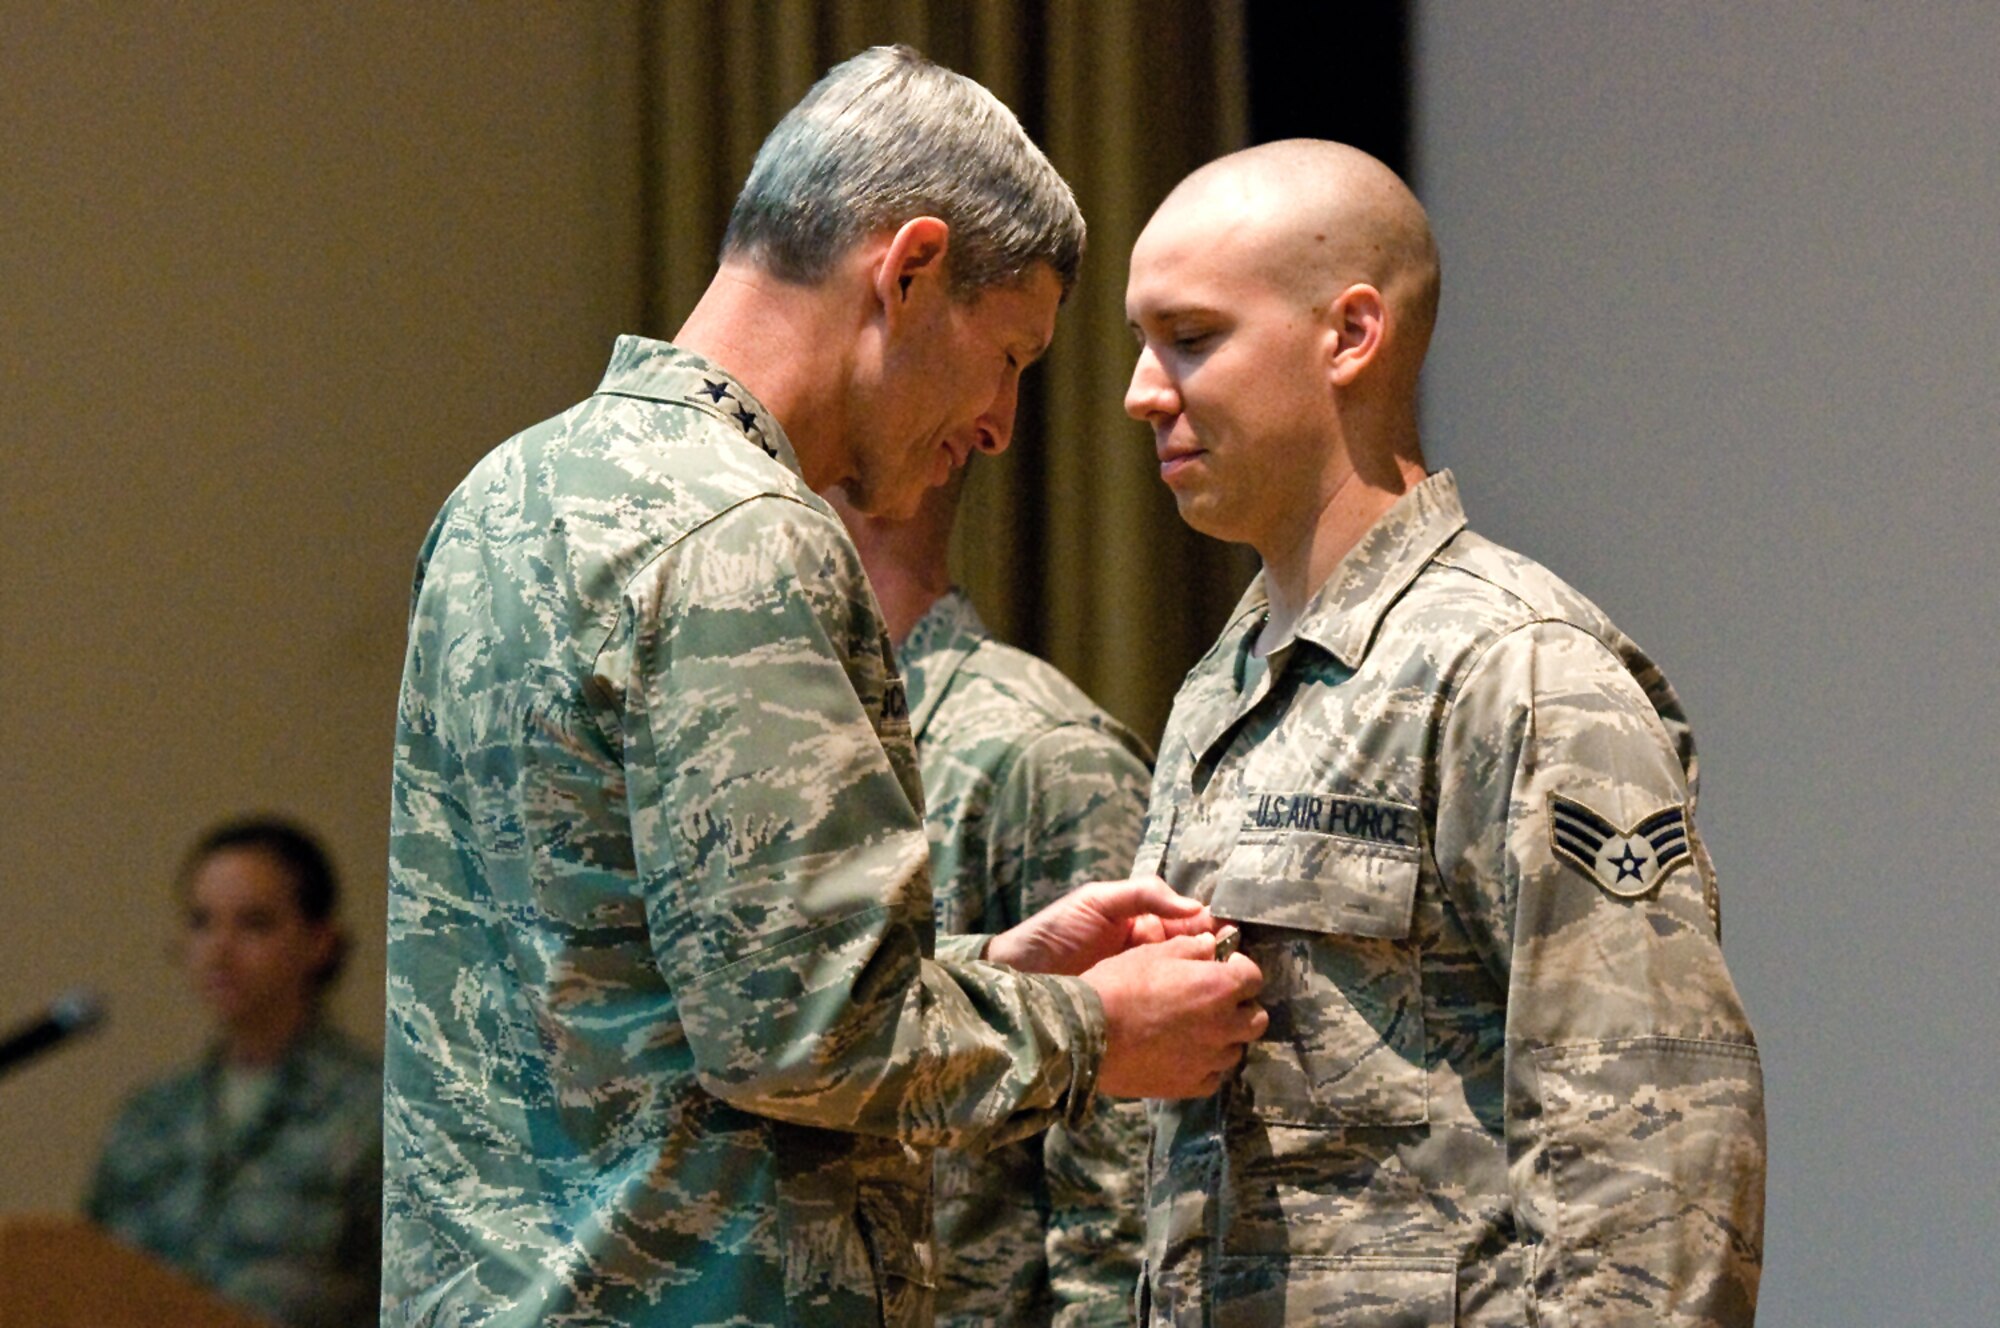 Air Force Chief of Staff Gen. Norton Schwartz presents an Air Force Combat Action Medal to Senior Airman Trent Cichy during a commander's call June 22, 2010, at the 386th Air Expeditionary Wing in Southwest Asia. Airman Cichy, a vehicle operator assigned to the 386th Expeditionary Logistics Readiness Squadron here, was injured May 27, 2010, when his supply convoy was hit by an improvised explosive device. (U.S. Air Force photo/Maj. Dale Greer)